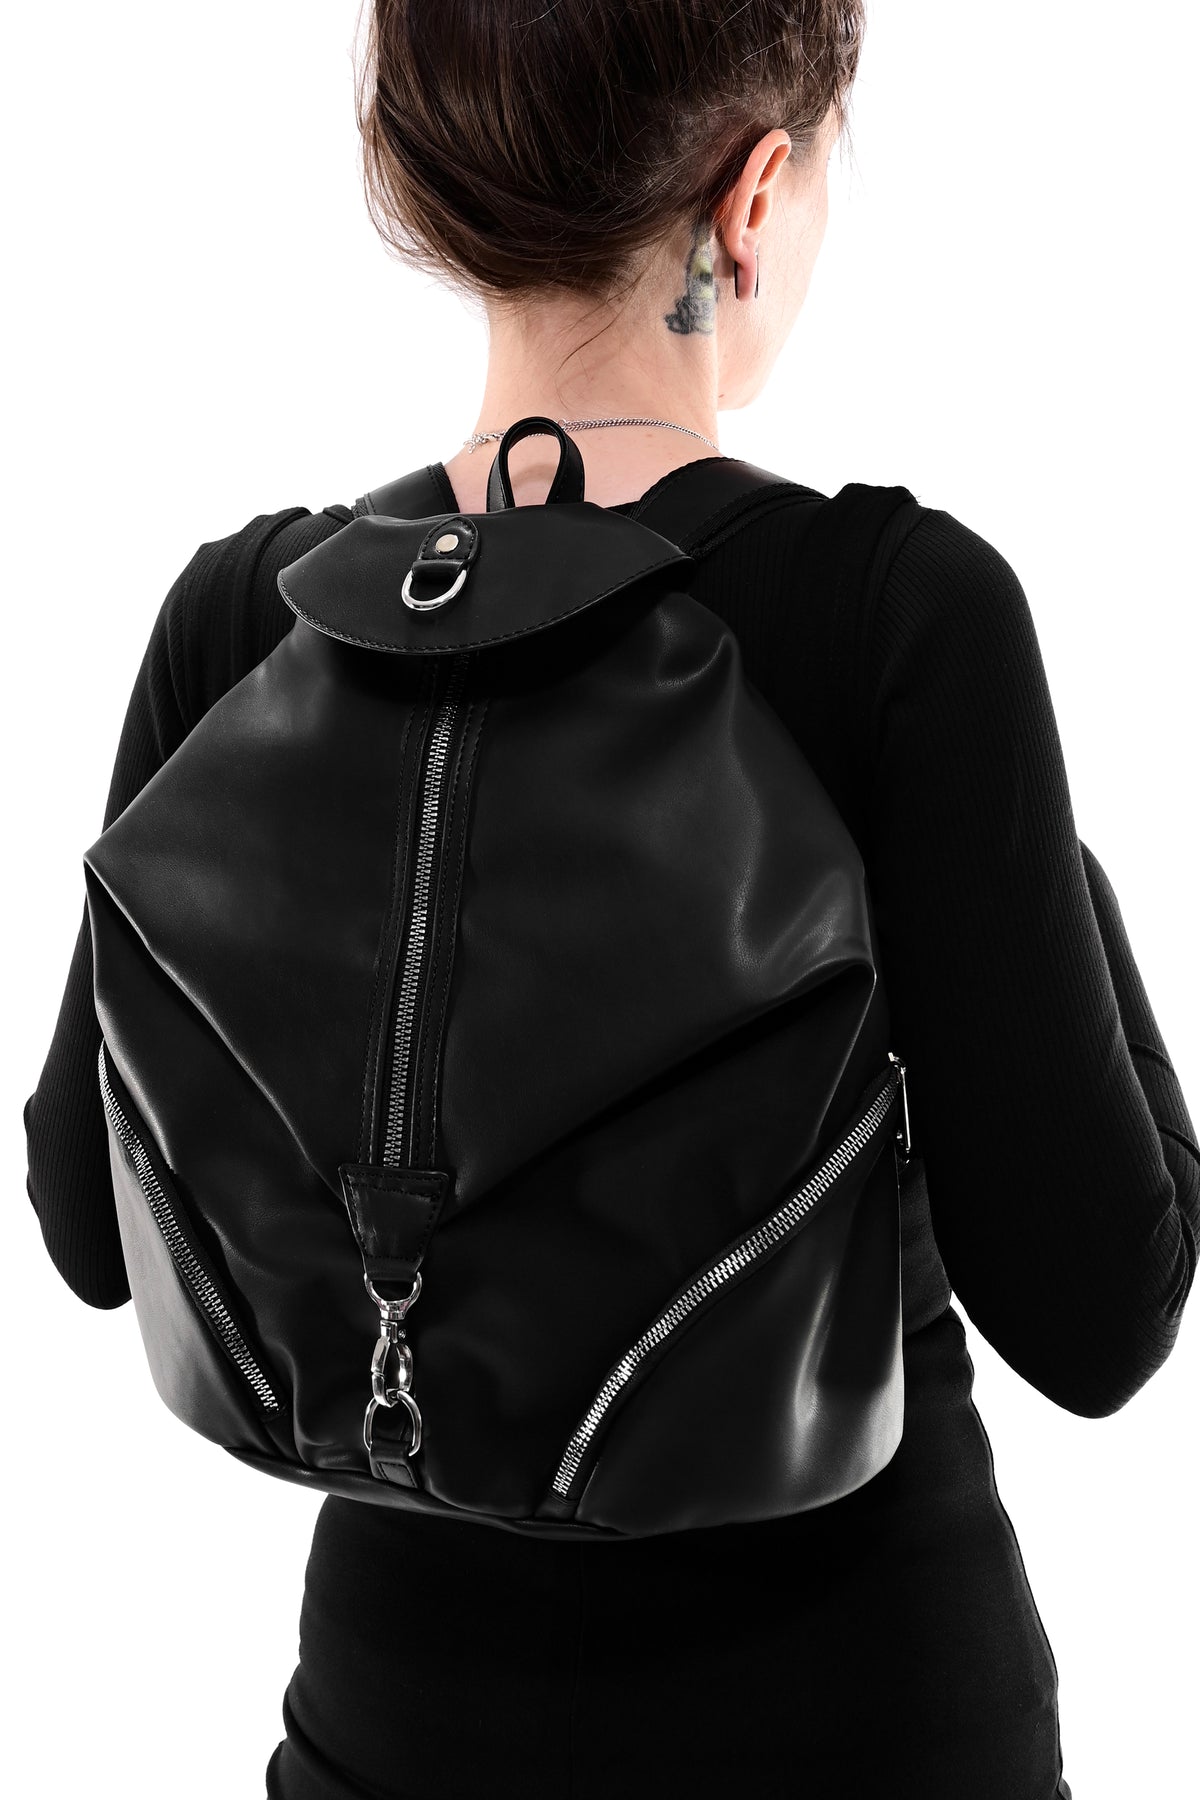 Abyss Convertible Backpack - Apple Leather